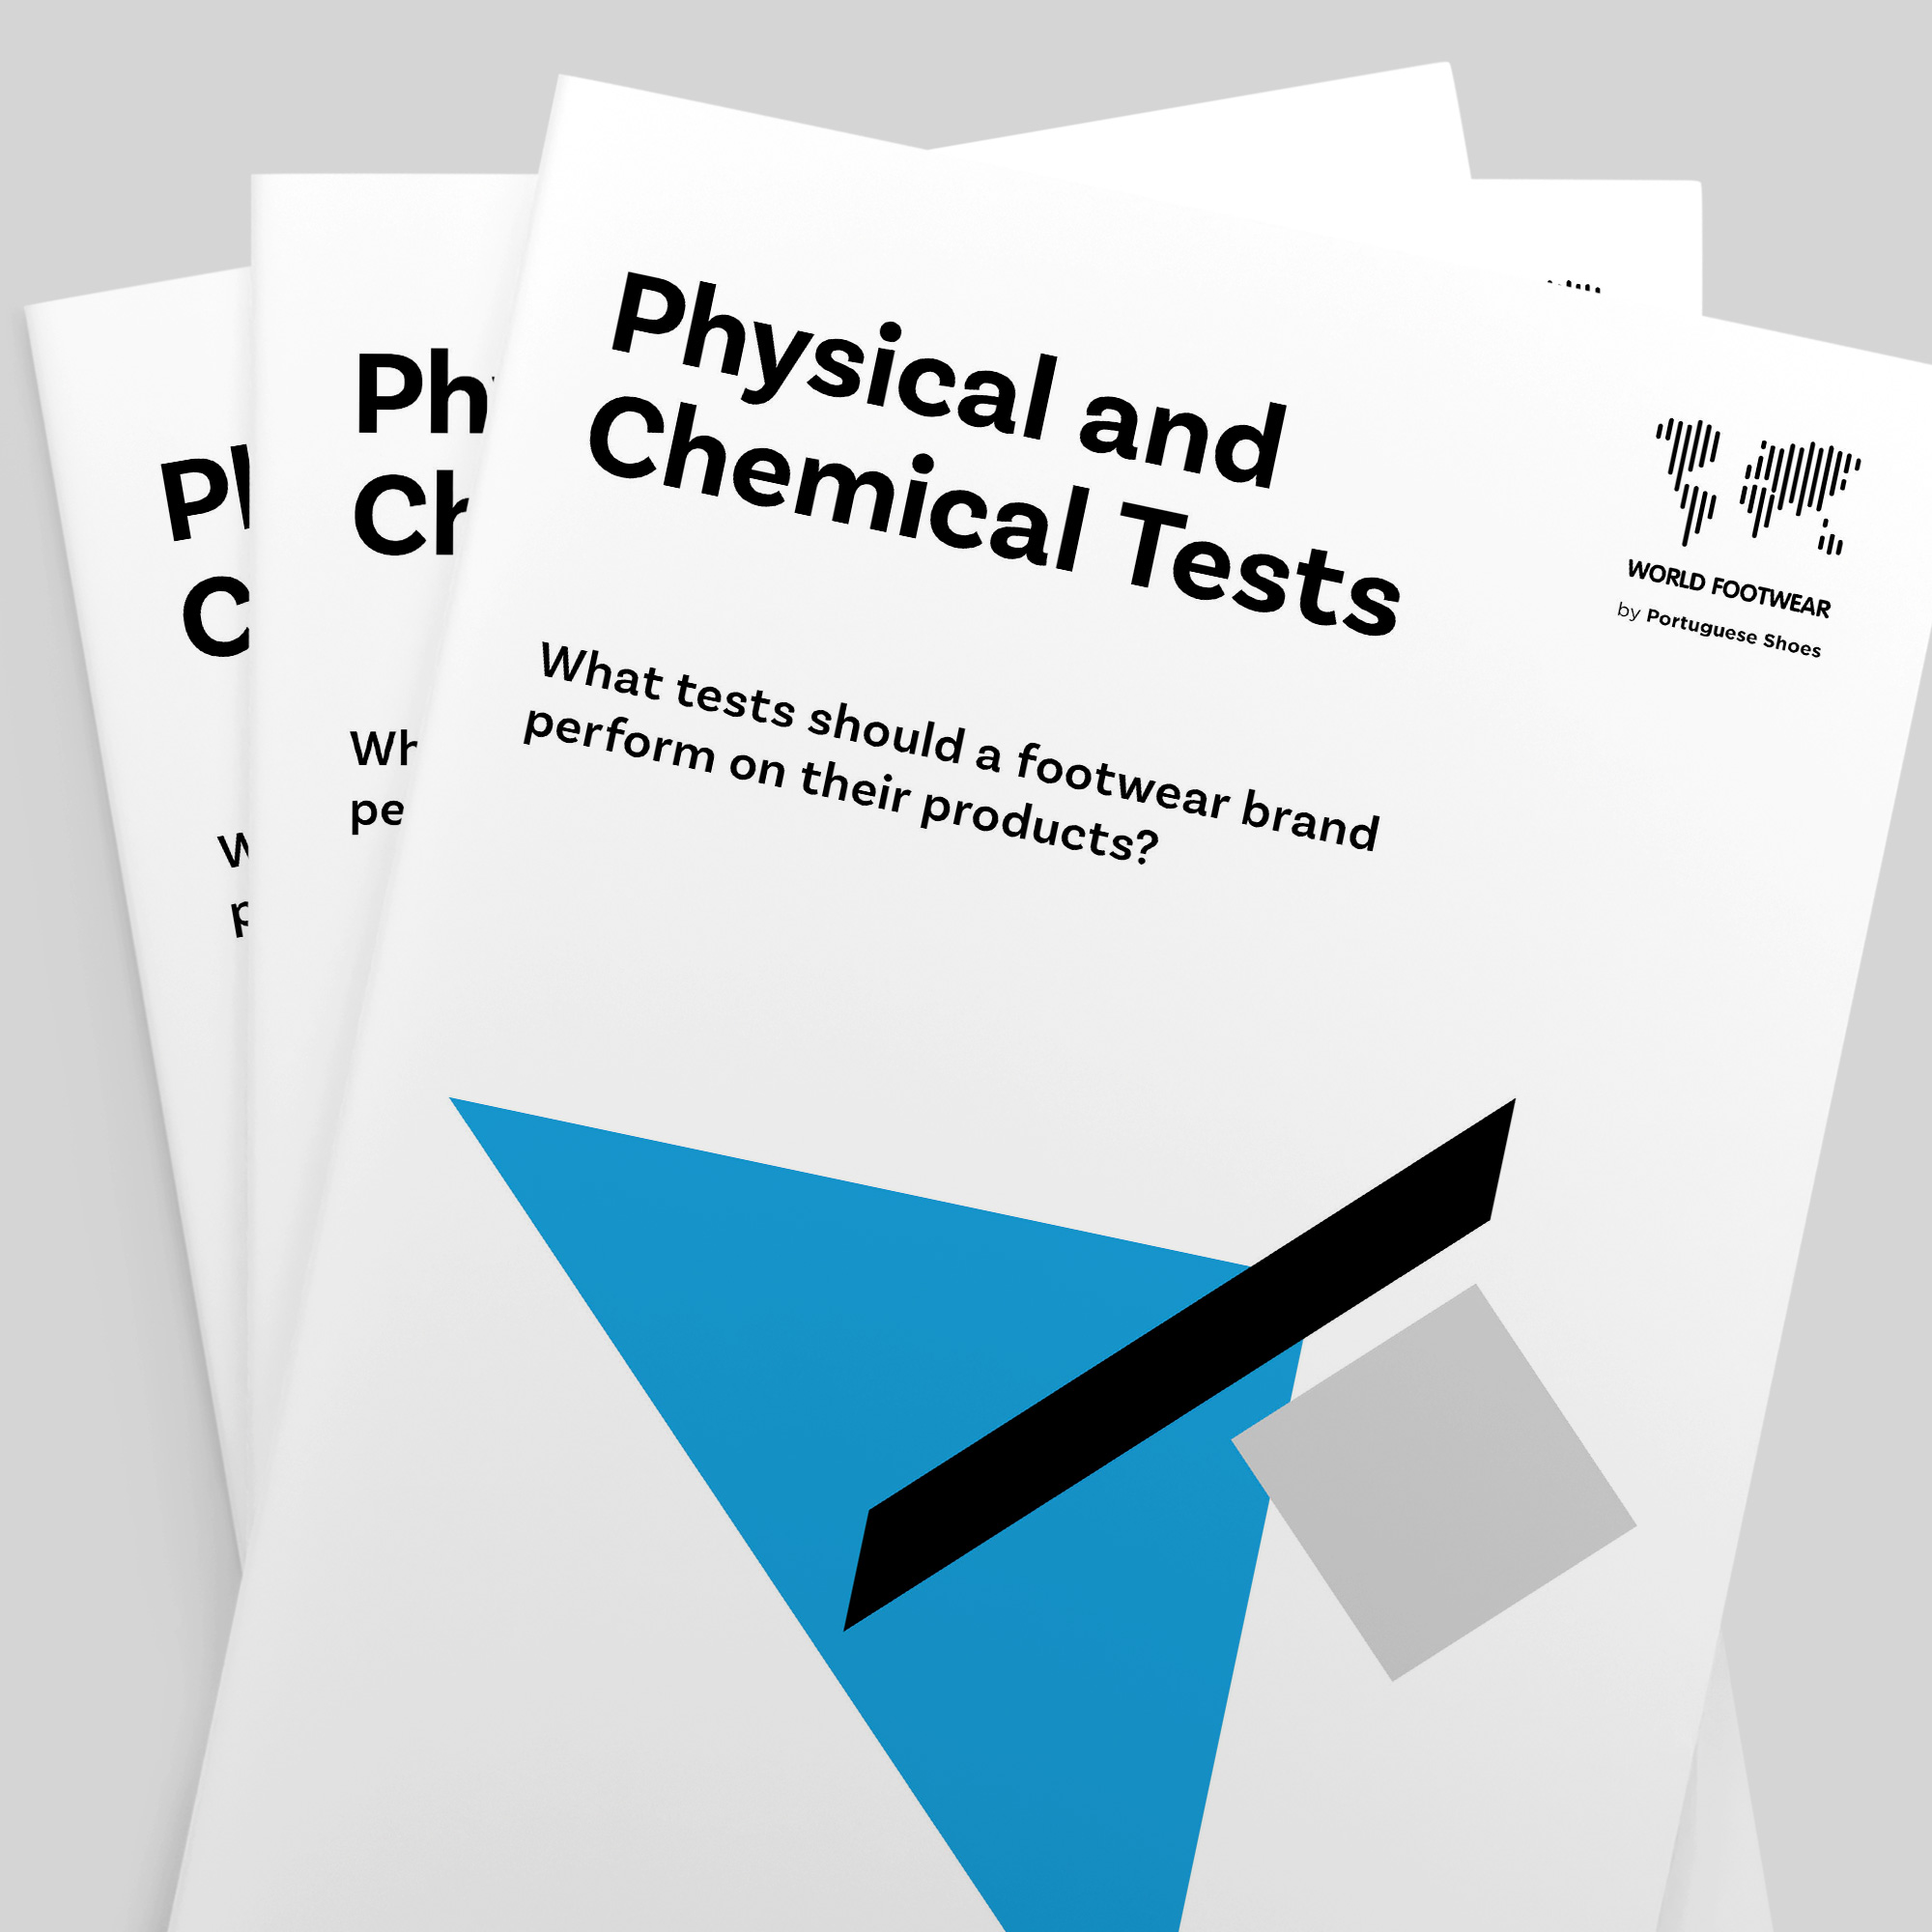 Physical and Chemical Tests: What tests should a footwear brand perform on their products?